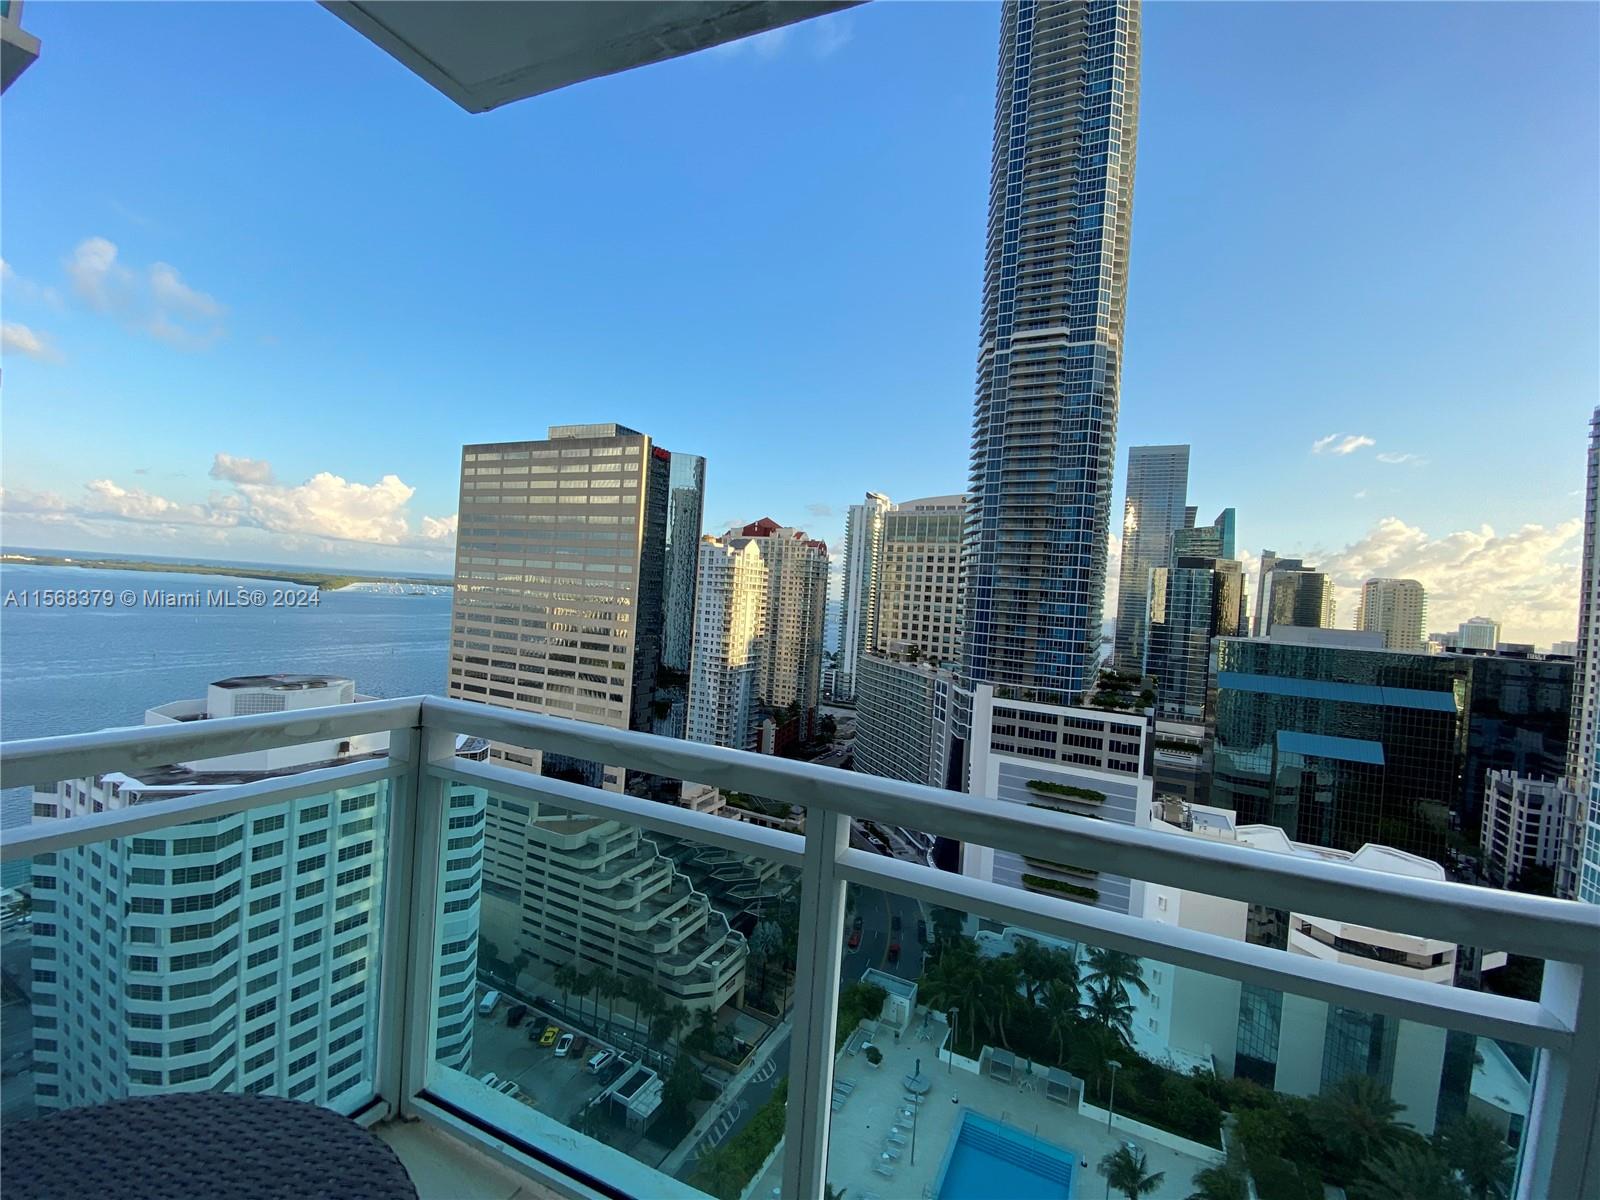 Centrally located, bright, spacious and tastefully furnished 2 bed 2 bath unit, large balcony with amazing water and city views in building with resort style amenities: two large heated pools, jacuzzi, BBQ area, gym, 24 hours concierge and more. Walking distance to malls and several restaurants and shops.